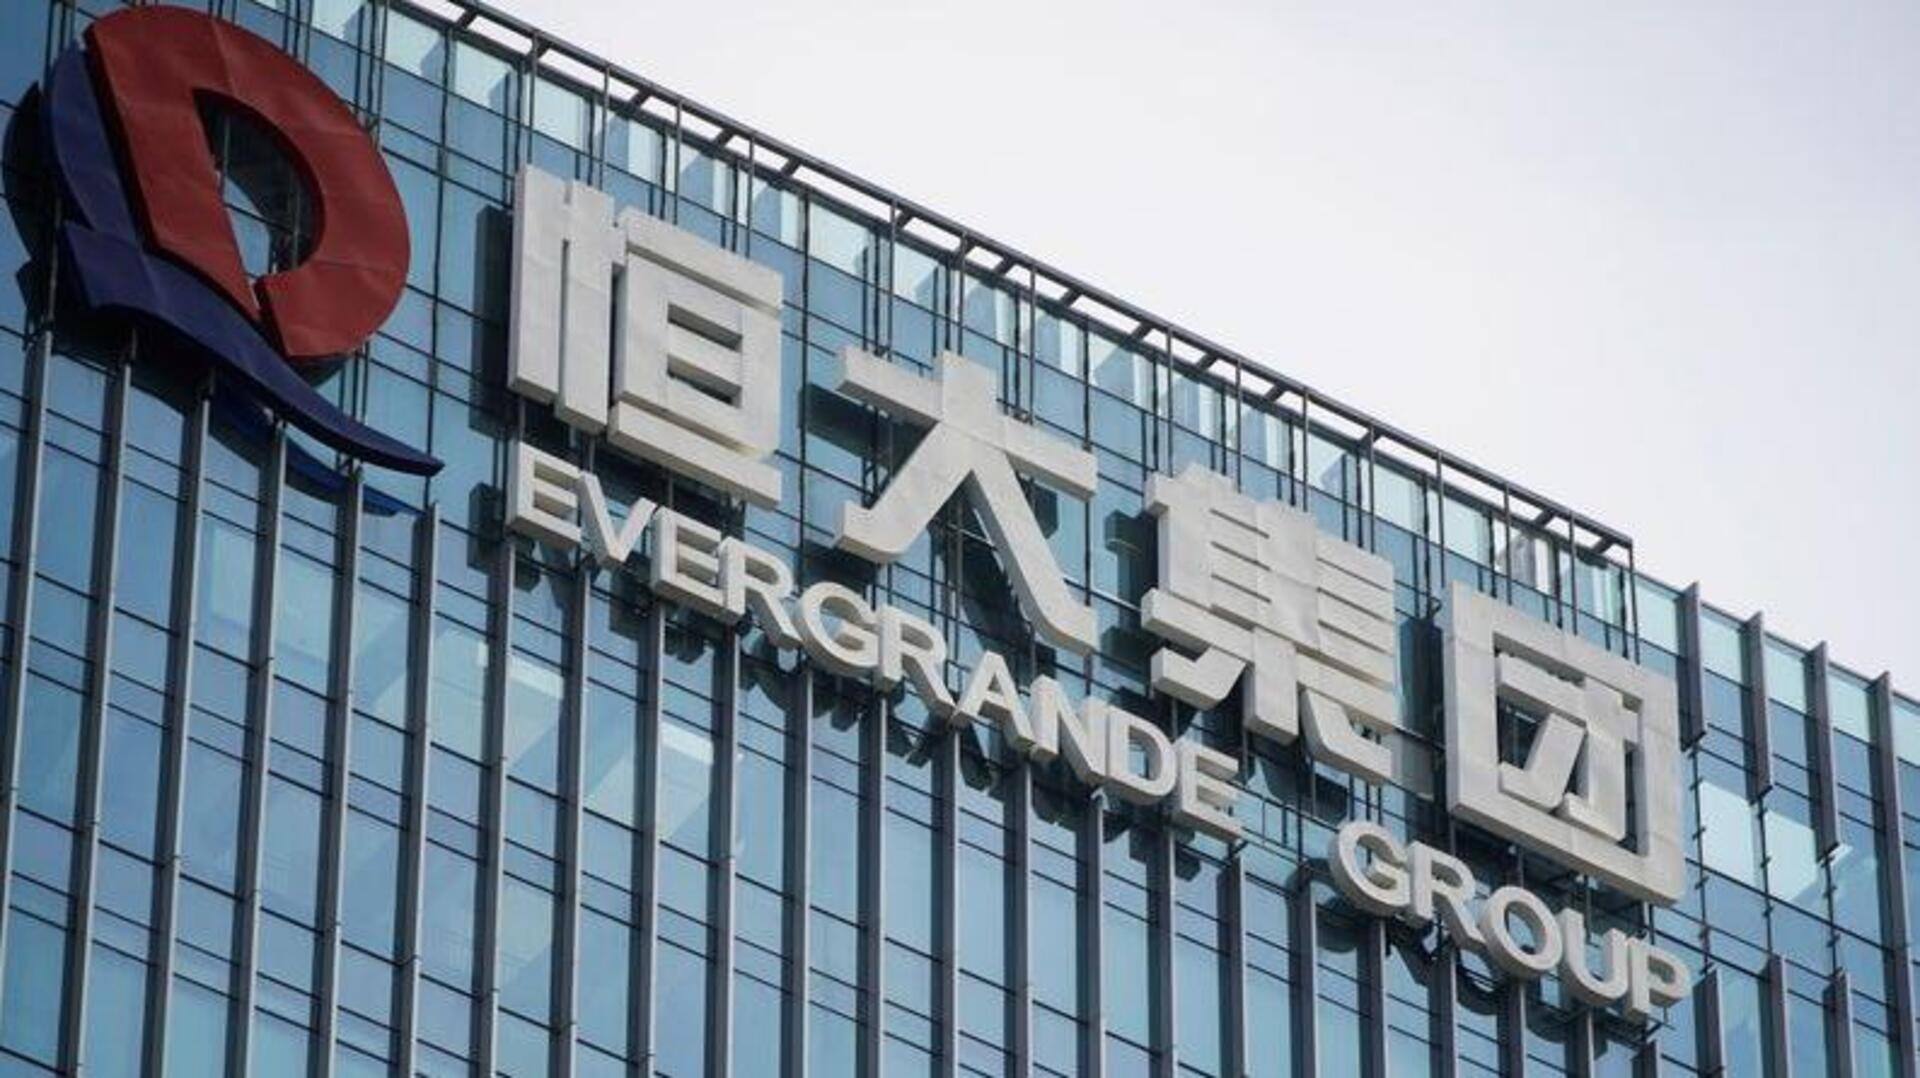 China Evergrande proposes new debt restructuring plan